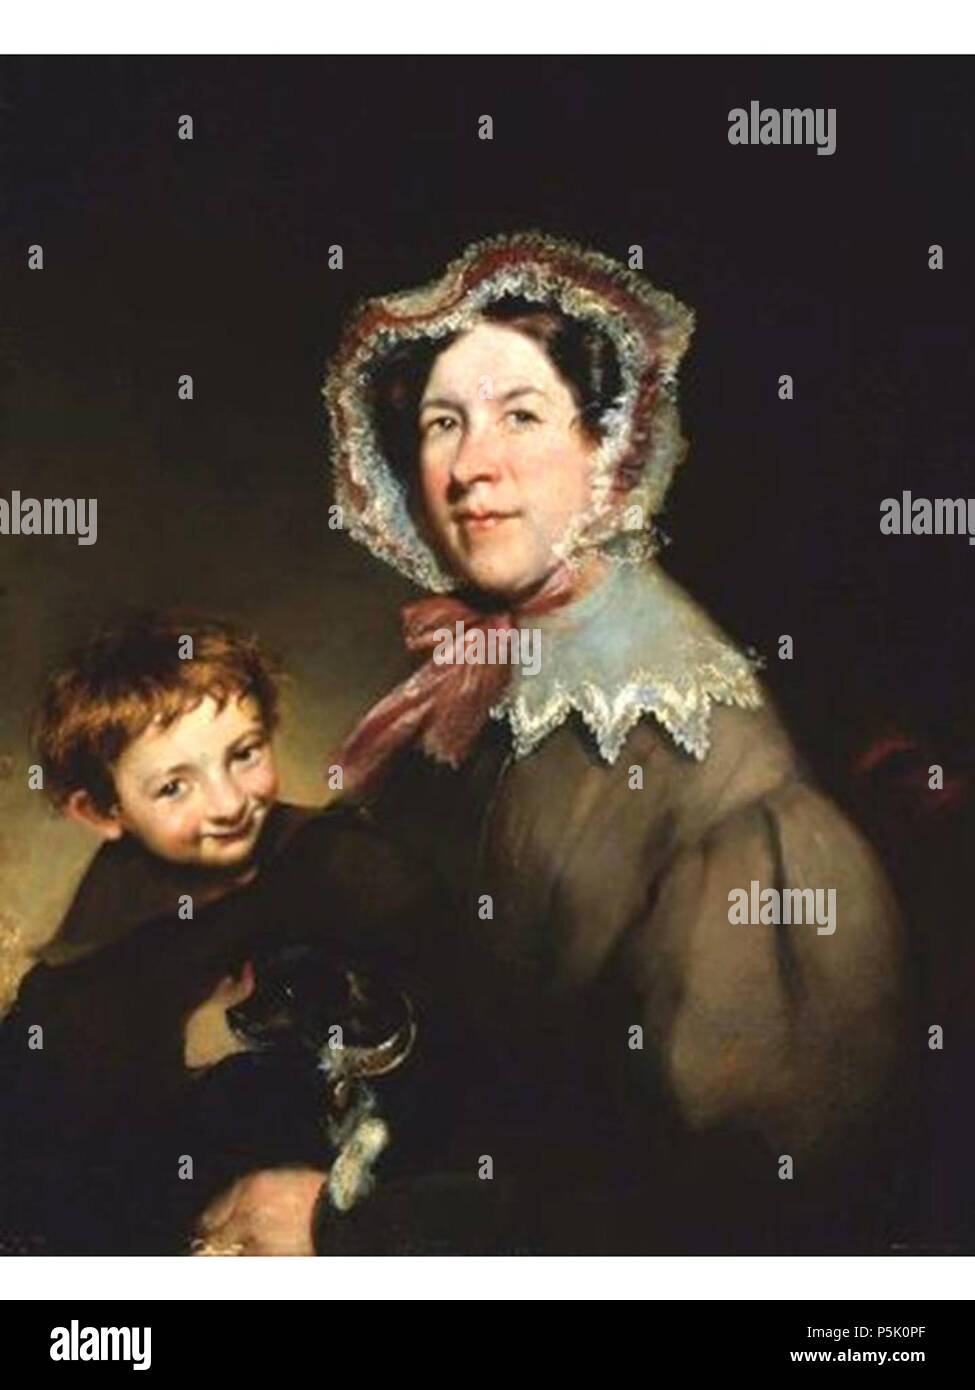 N/A. English: Samuel Lovett Waldo's second wife and son, c.1830 . 21 December 2012, 12:50:04. Samuel Lovett Waldo (1783-1861) 28 Deliverance Mapes and Her Son Stock Photo